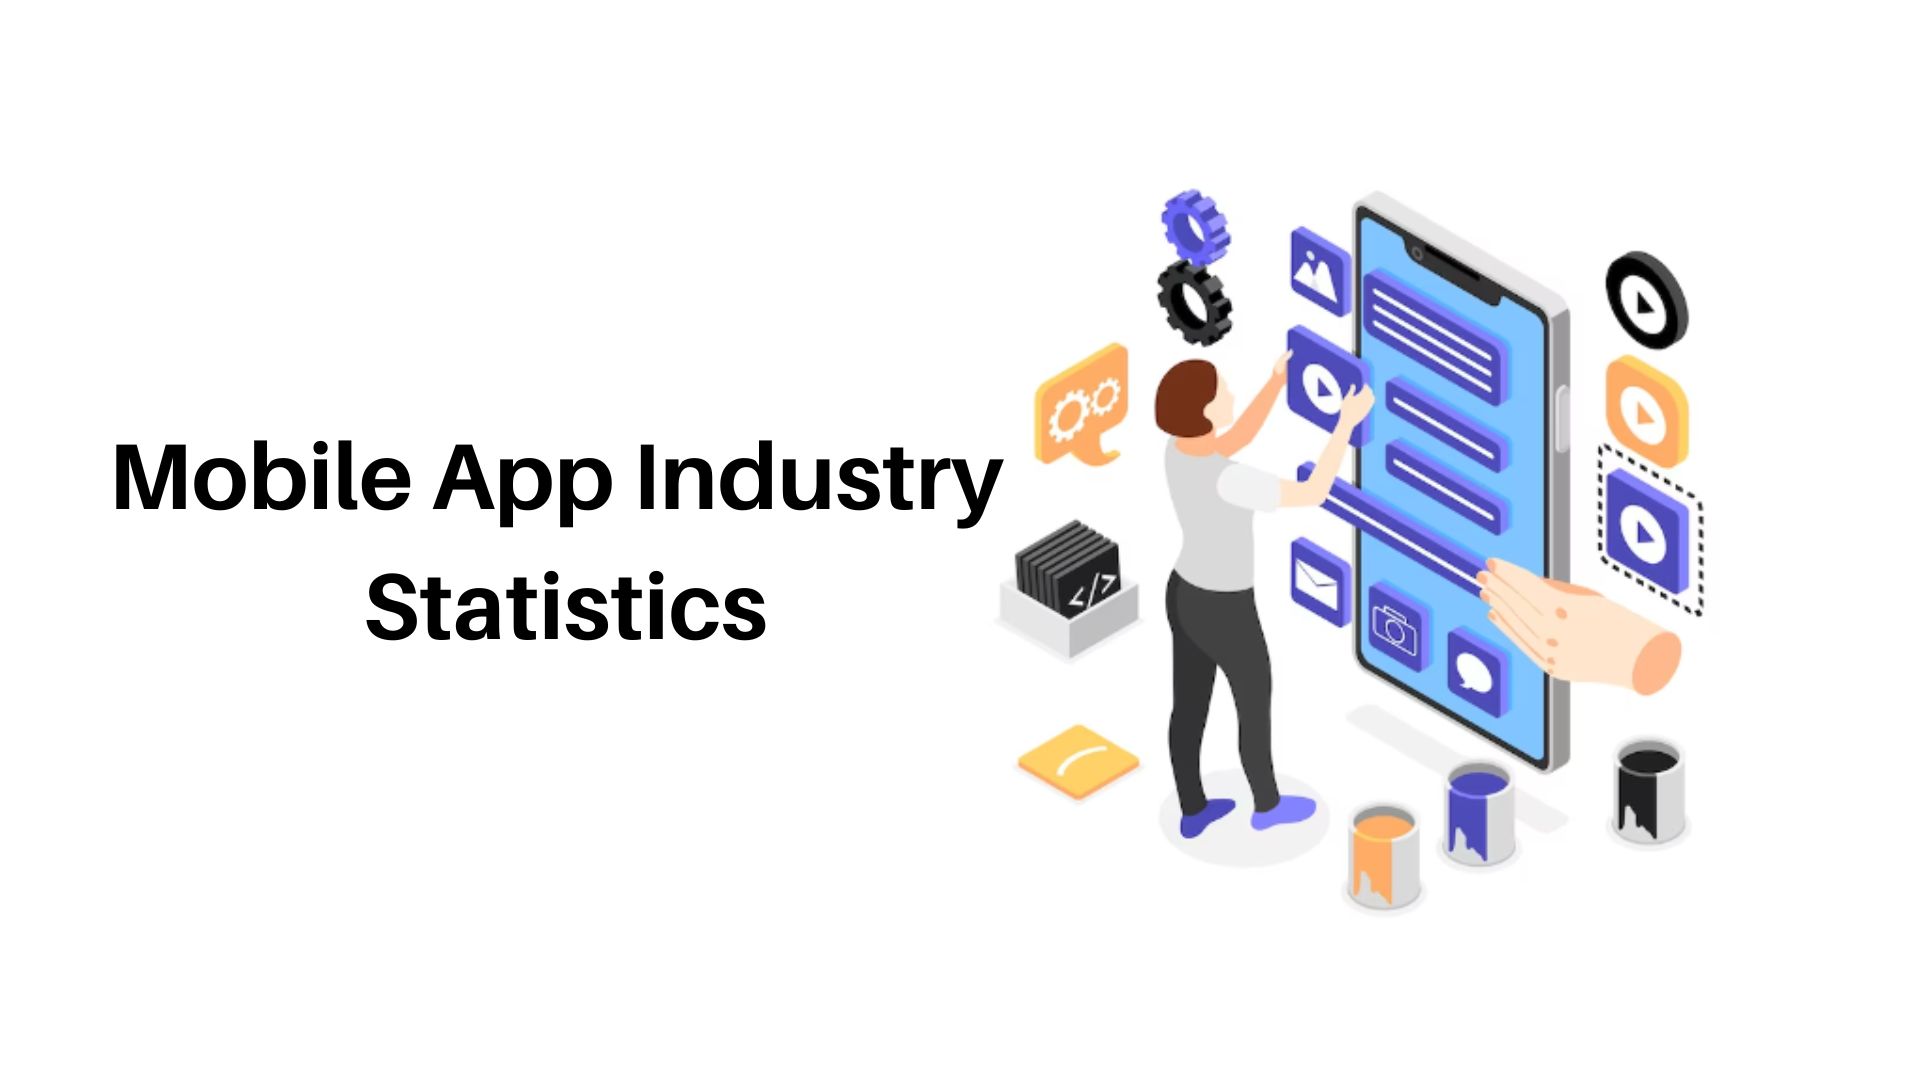 Mobile App Industry Statistics By Millennial Preferences, Smart Phone Users, Country, User Retention, Age Group, Spending Over Time